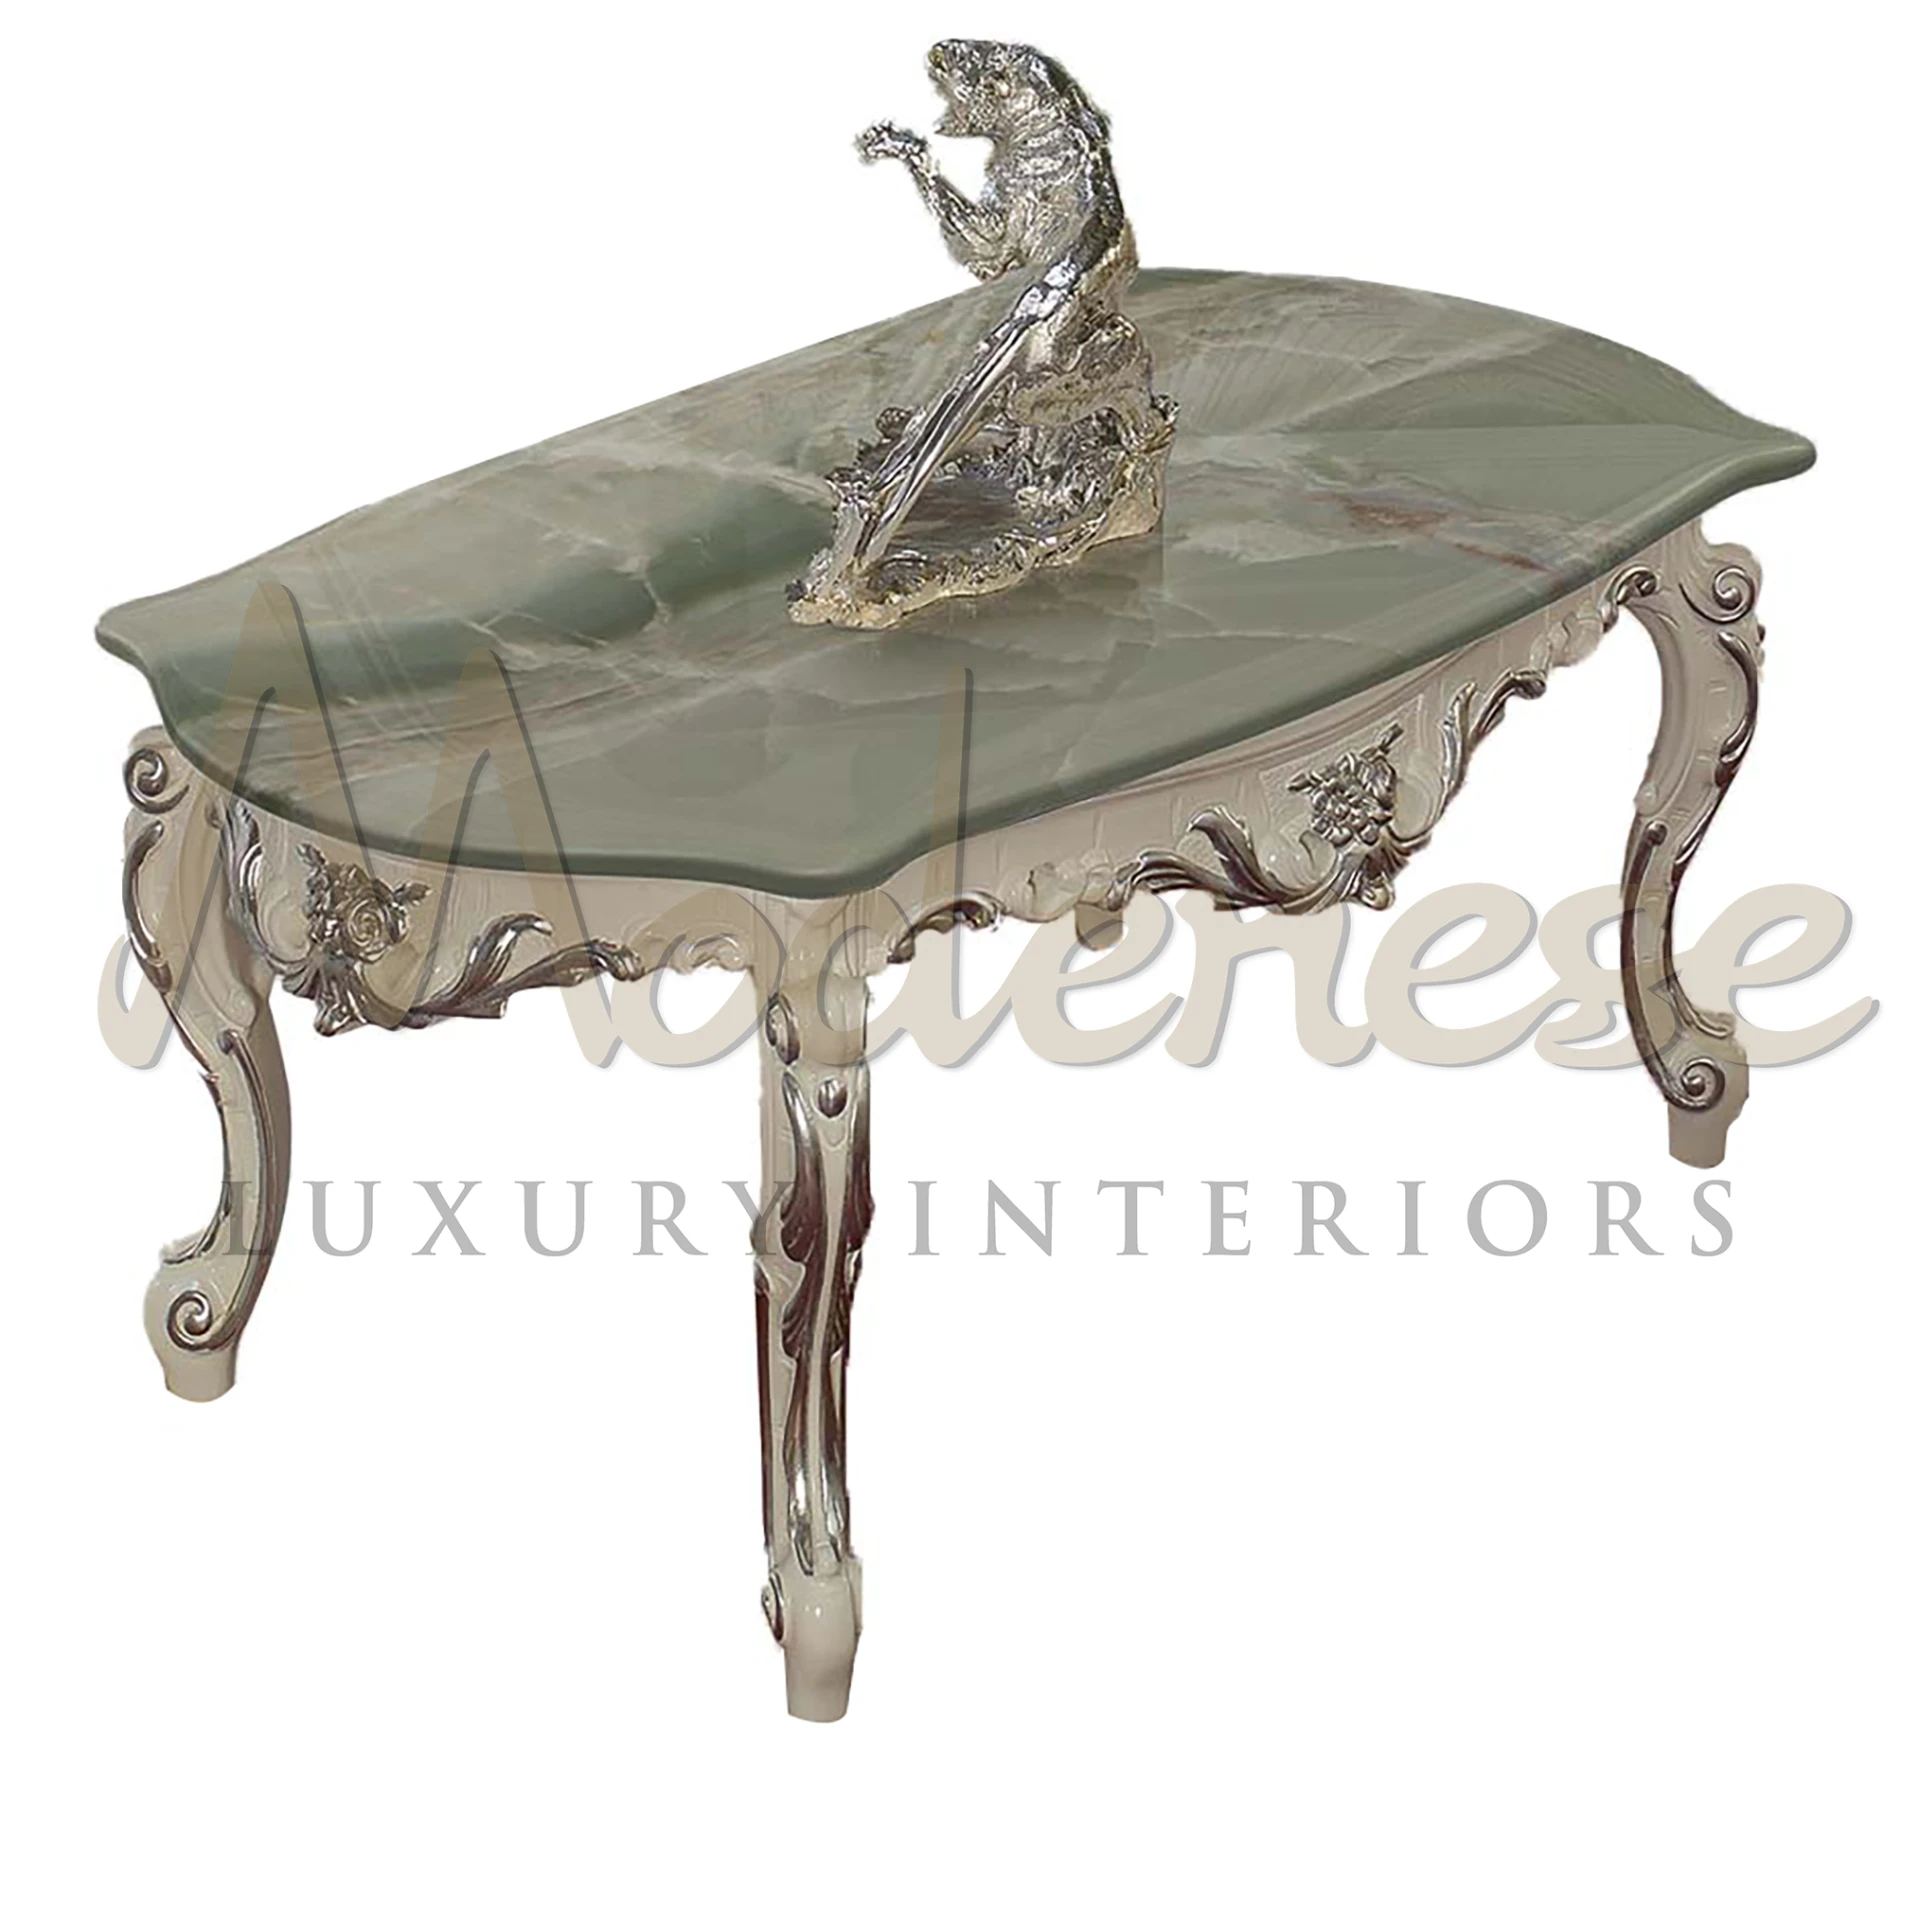 Classic Marble Top Coffee Table: Elegant Italian design, solid wood base, intricate gold leaf accents.